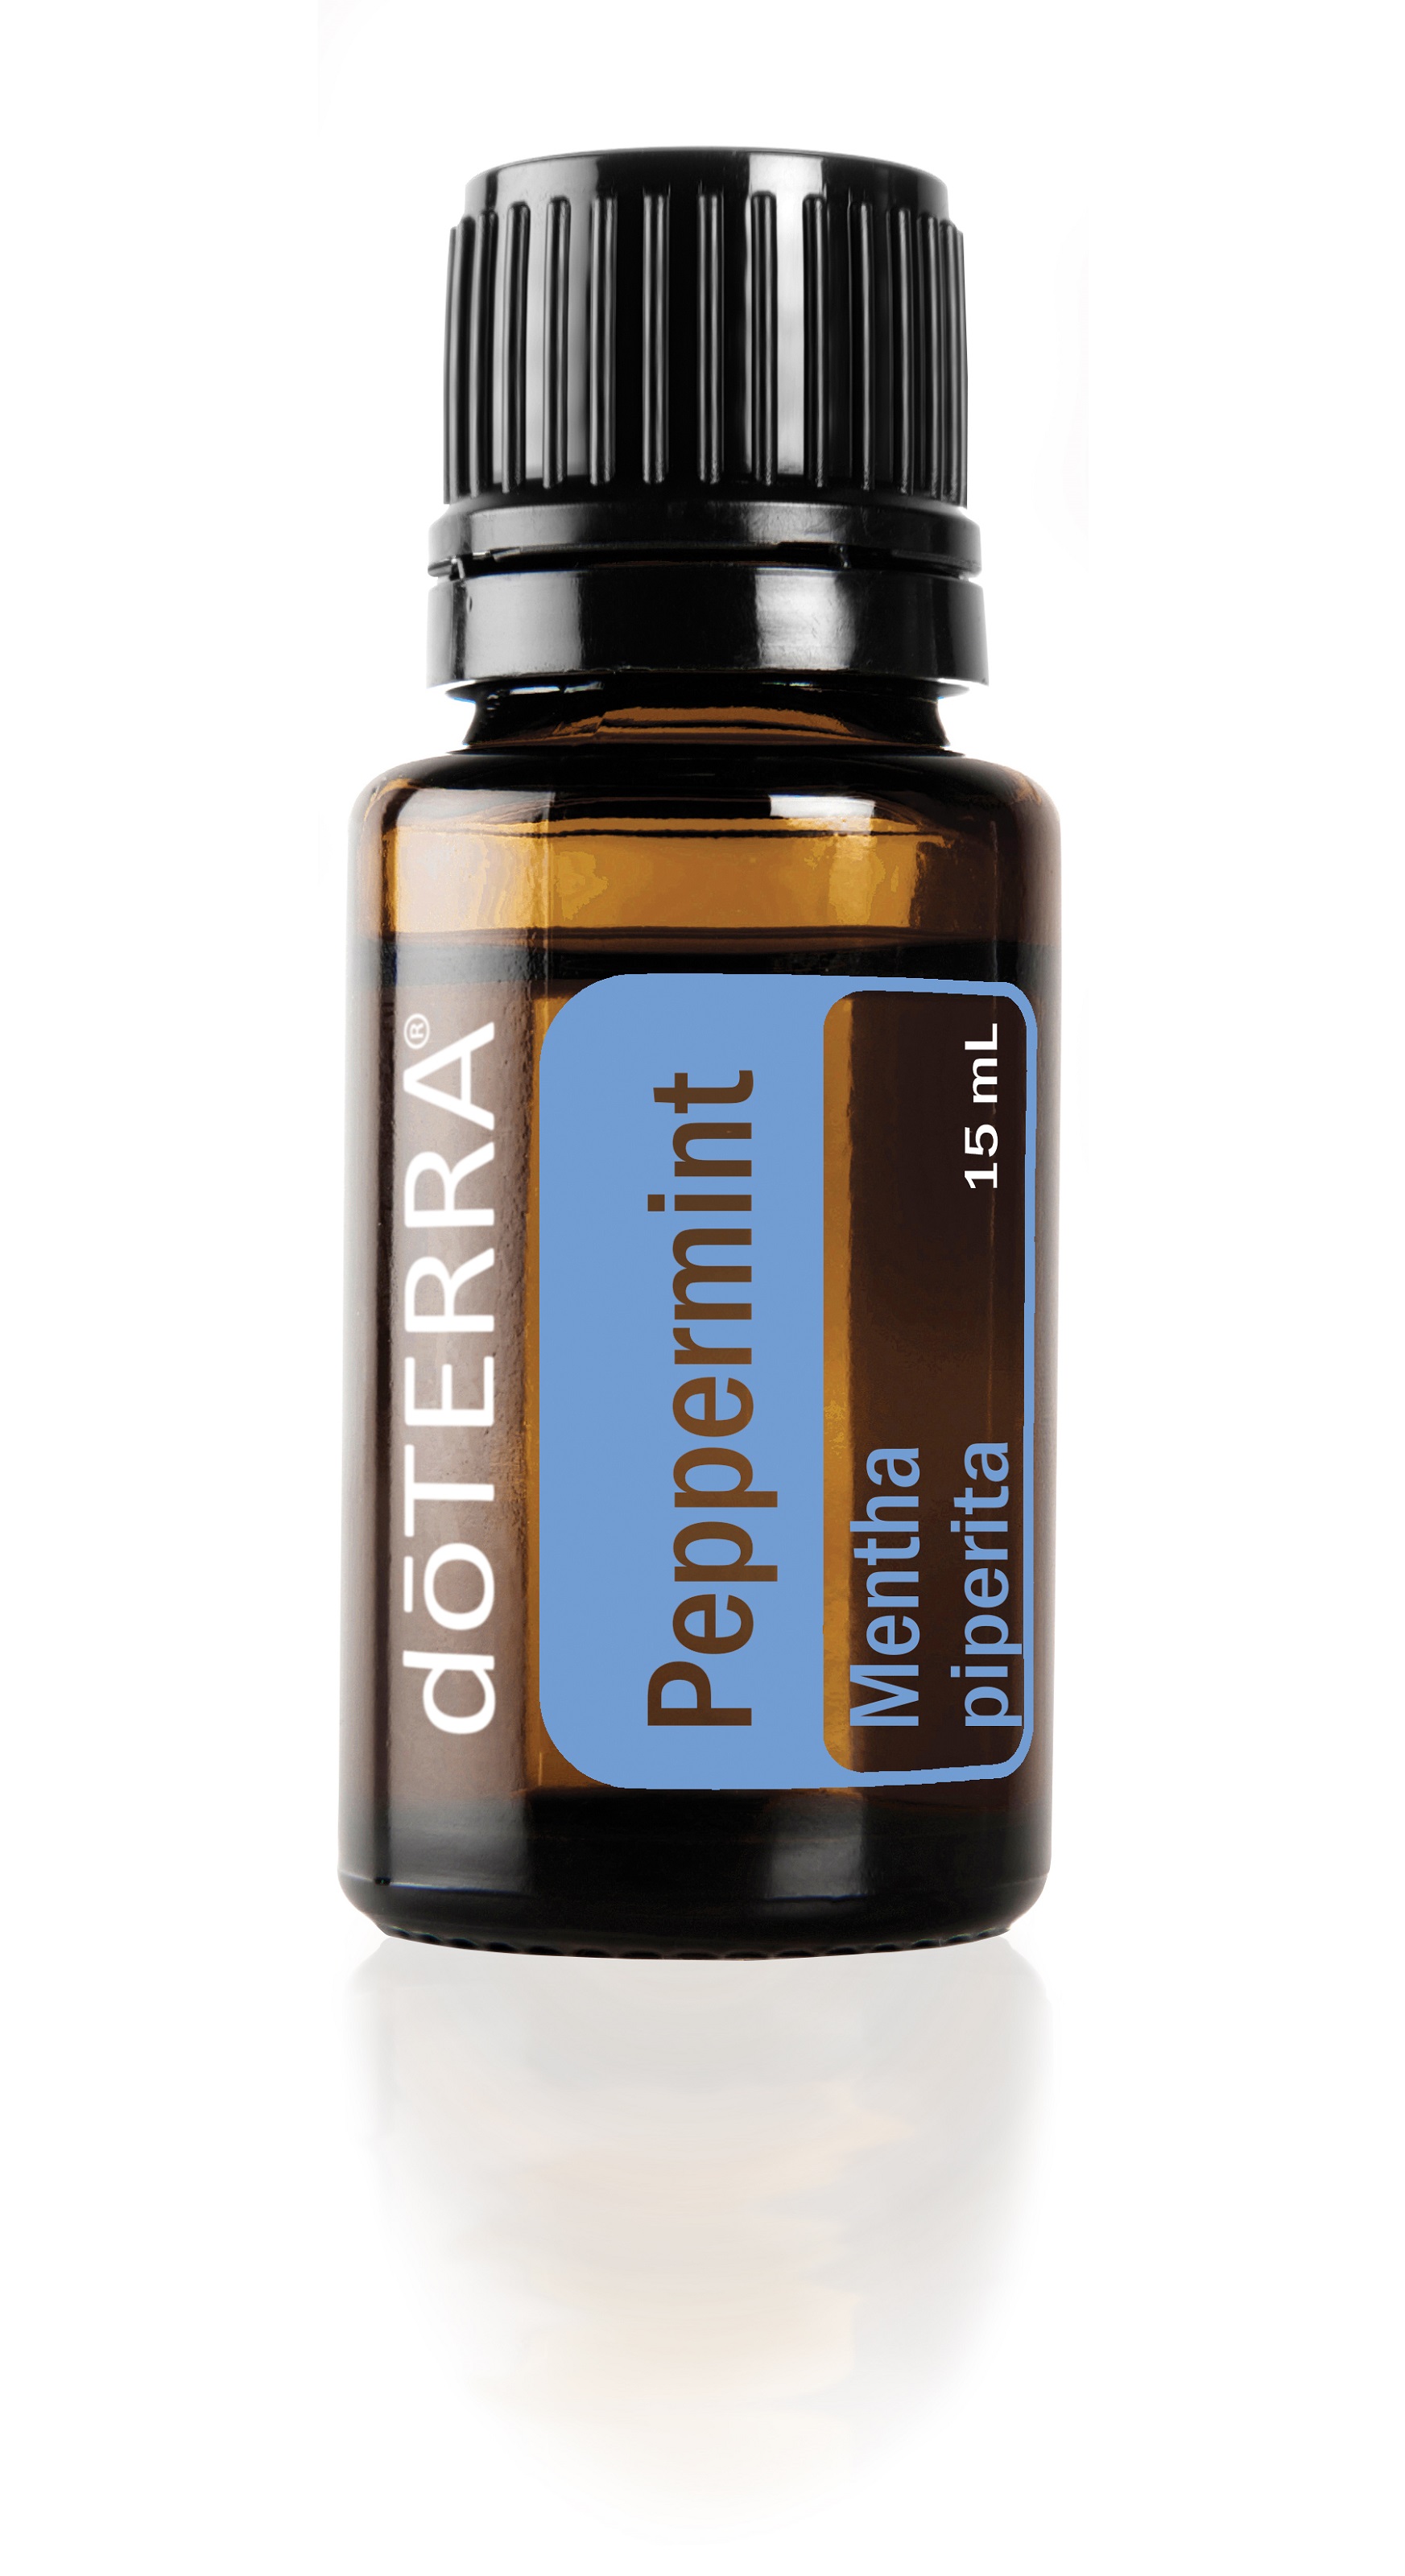 Peppermint Essential Oil & How it can be used